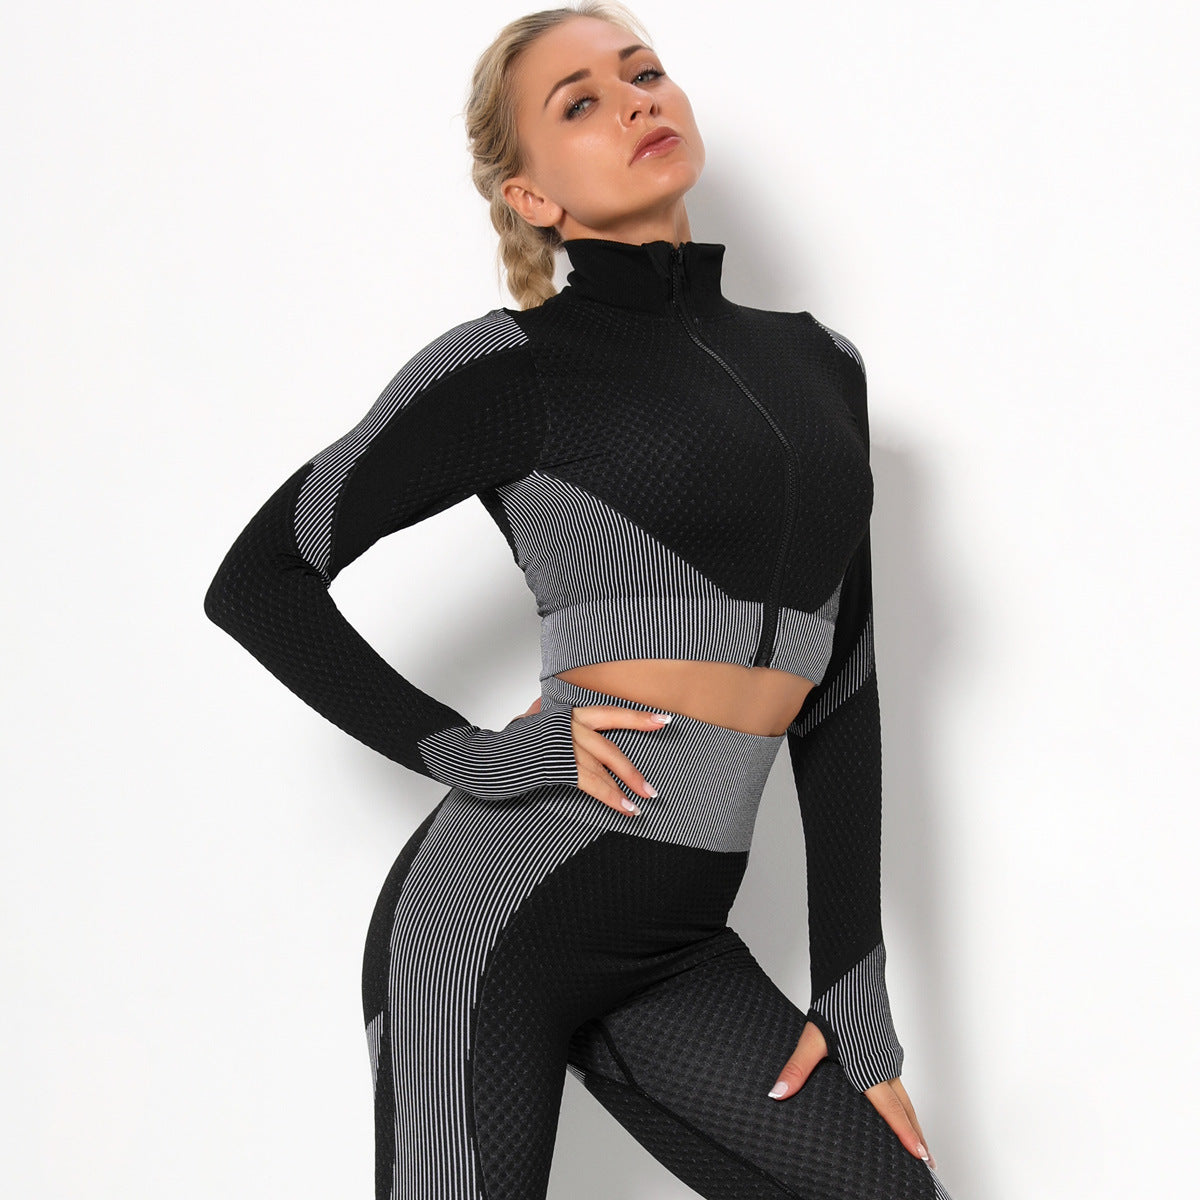 Popular Zipper Sports Tight Top Quick Dry Training Running Yoga Exposed cropped Seamless Long Sleeve